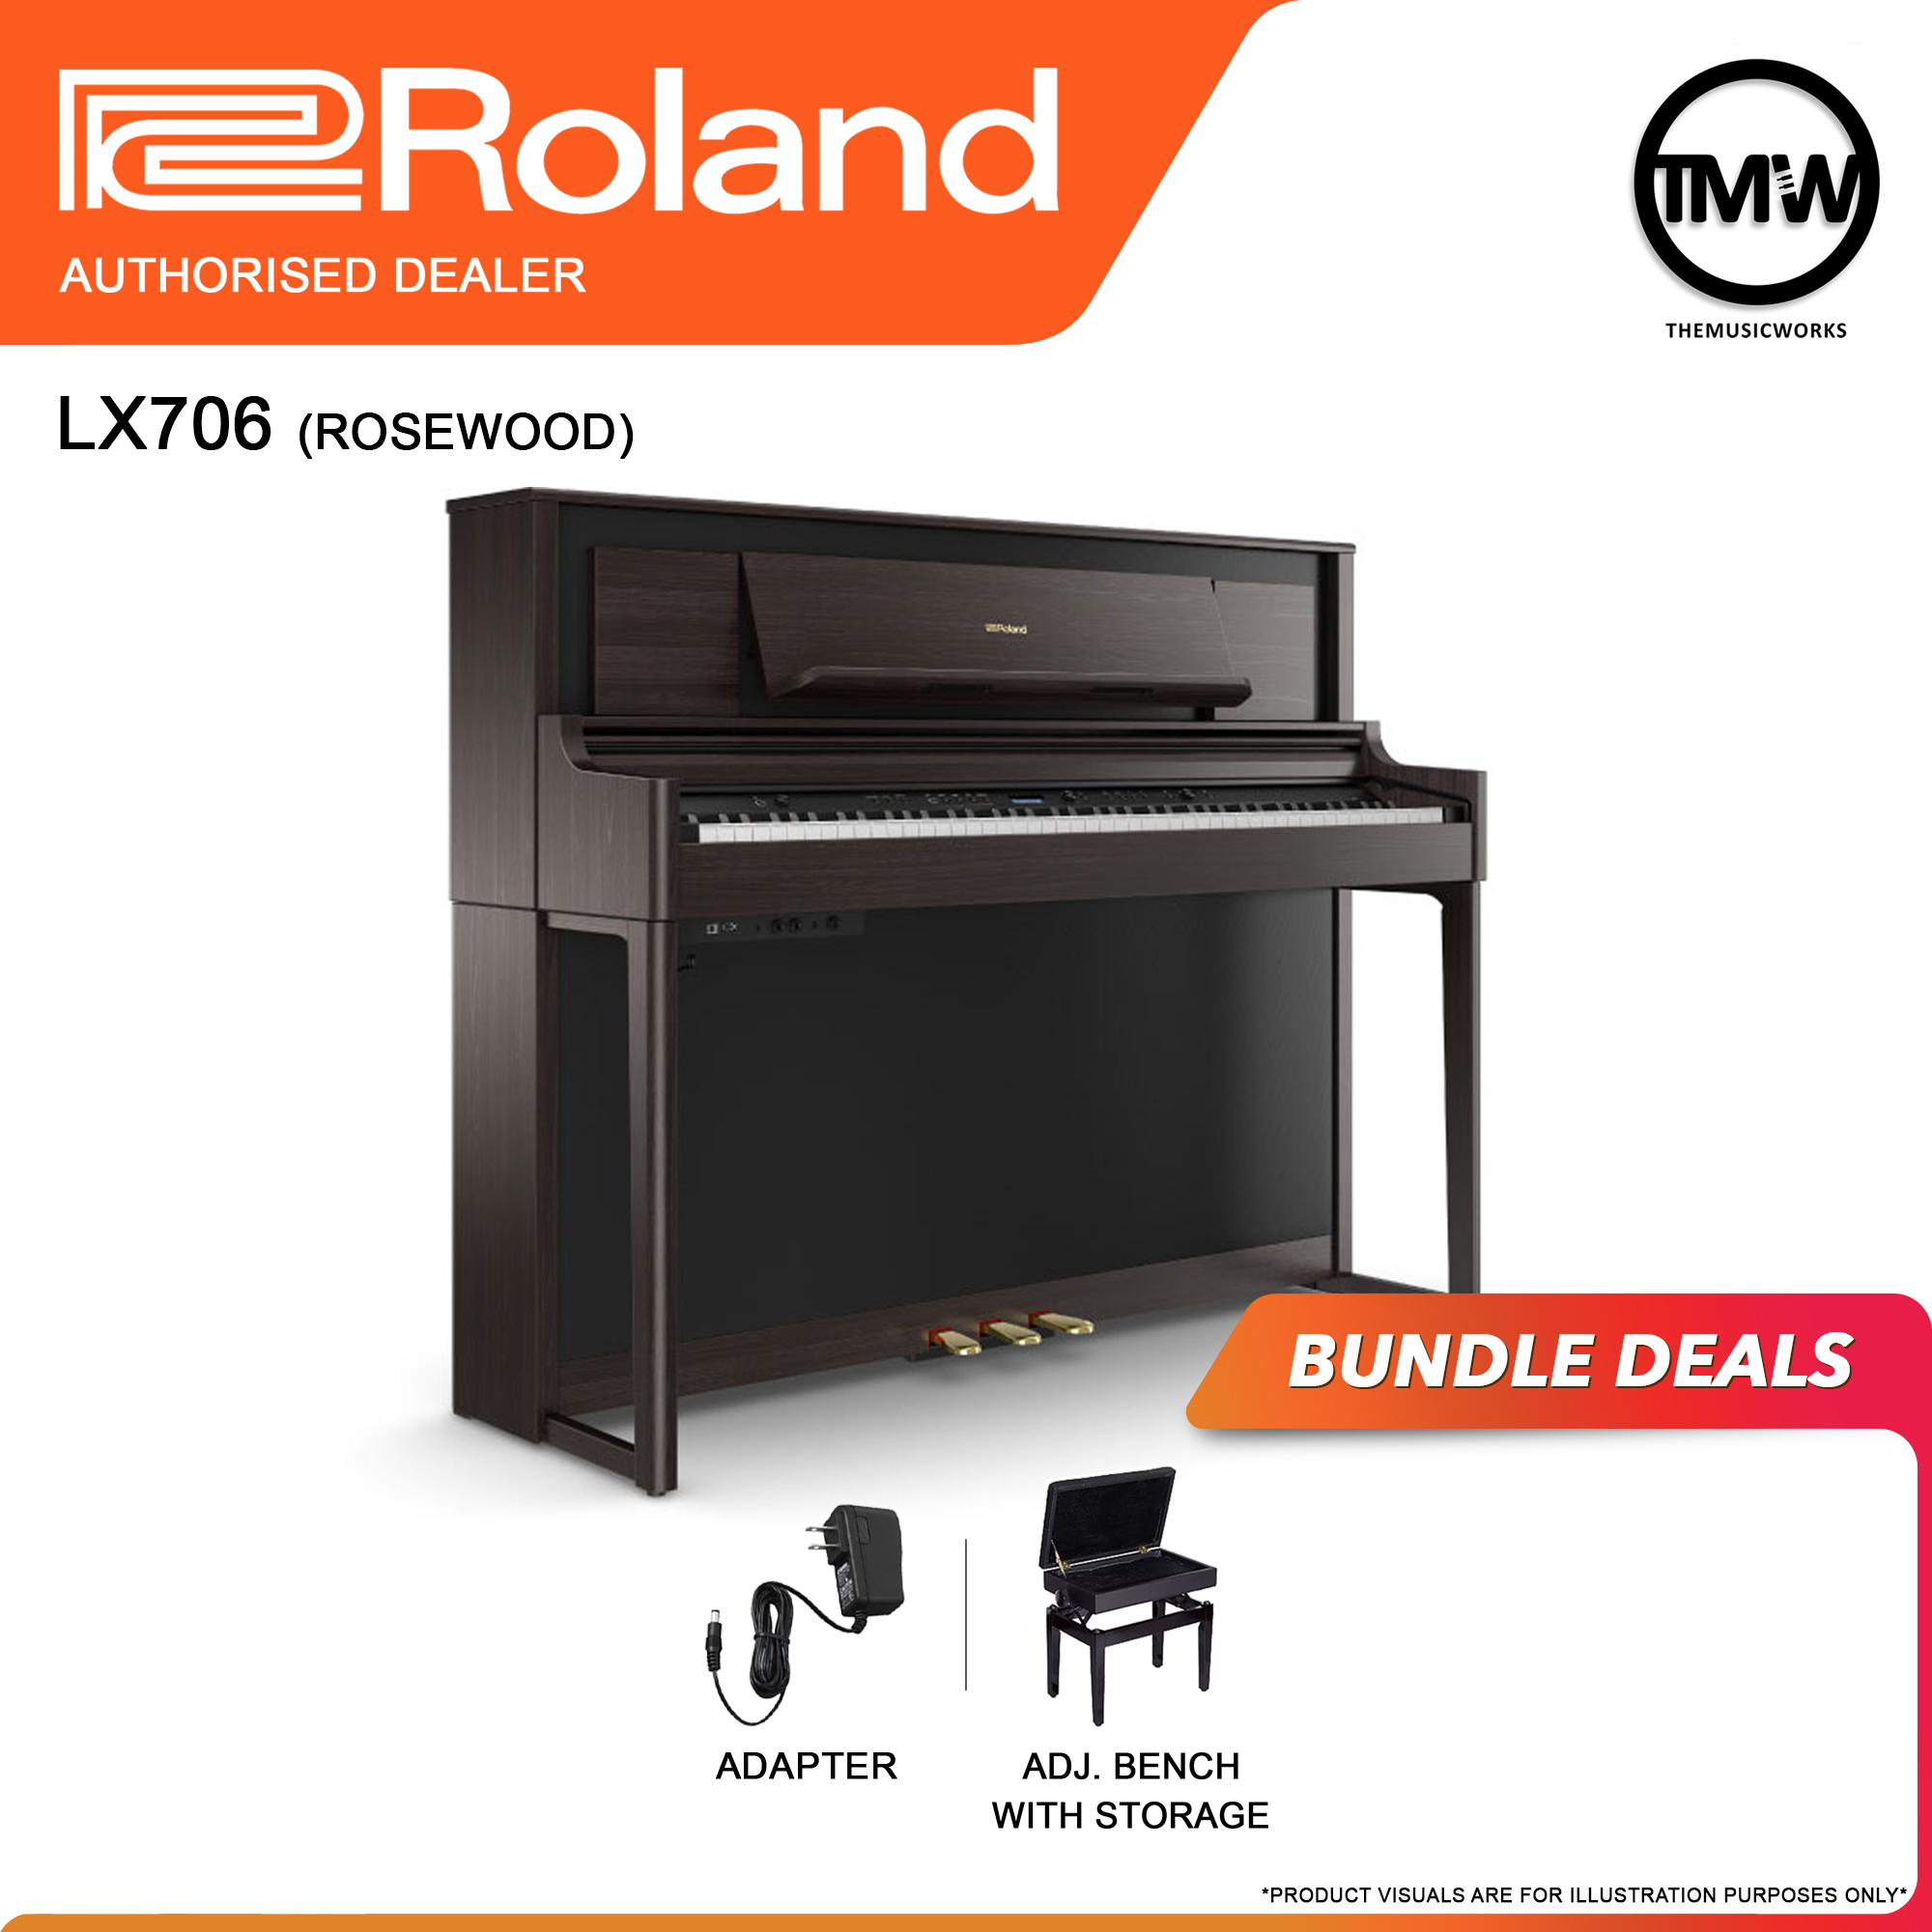 roland lx706 rosewood with adapter, and adjustable bench with storage